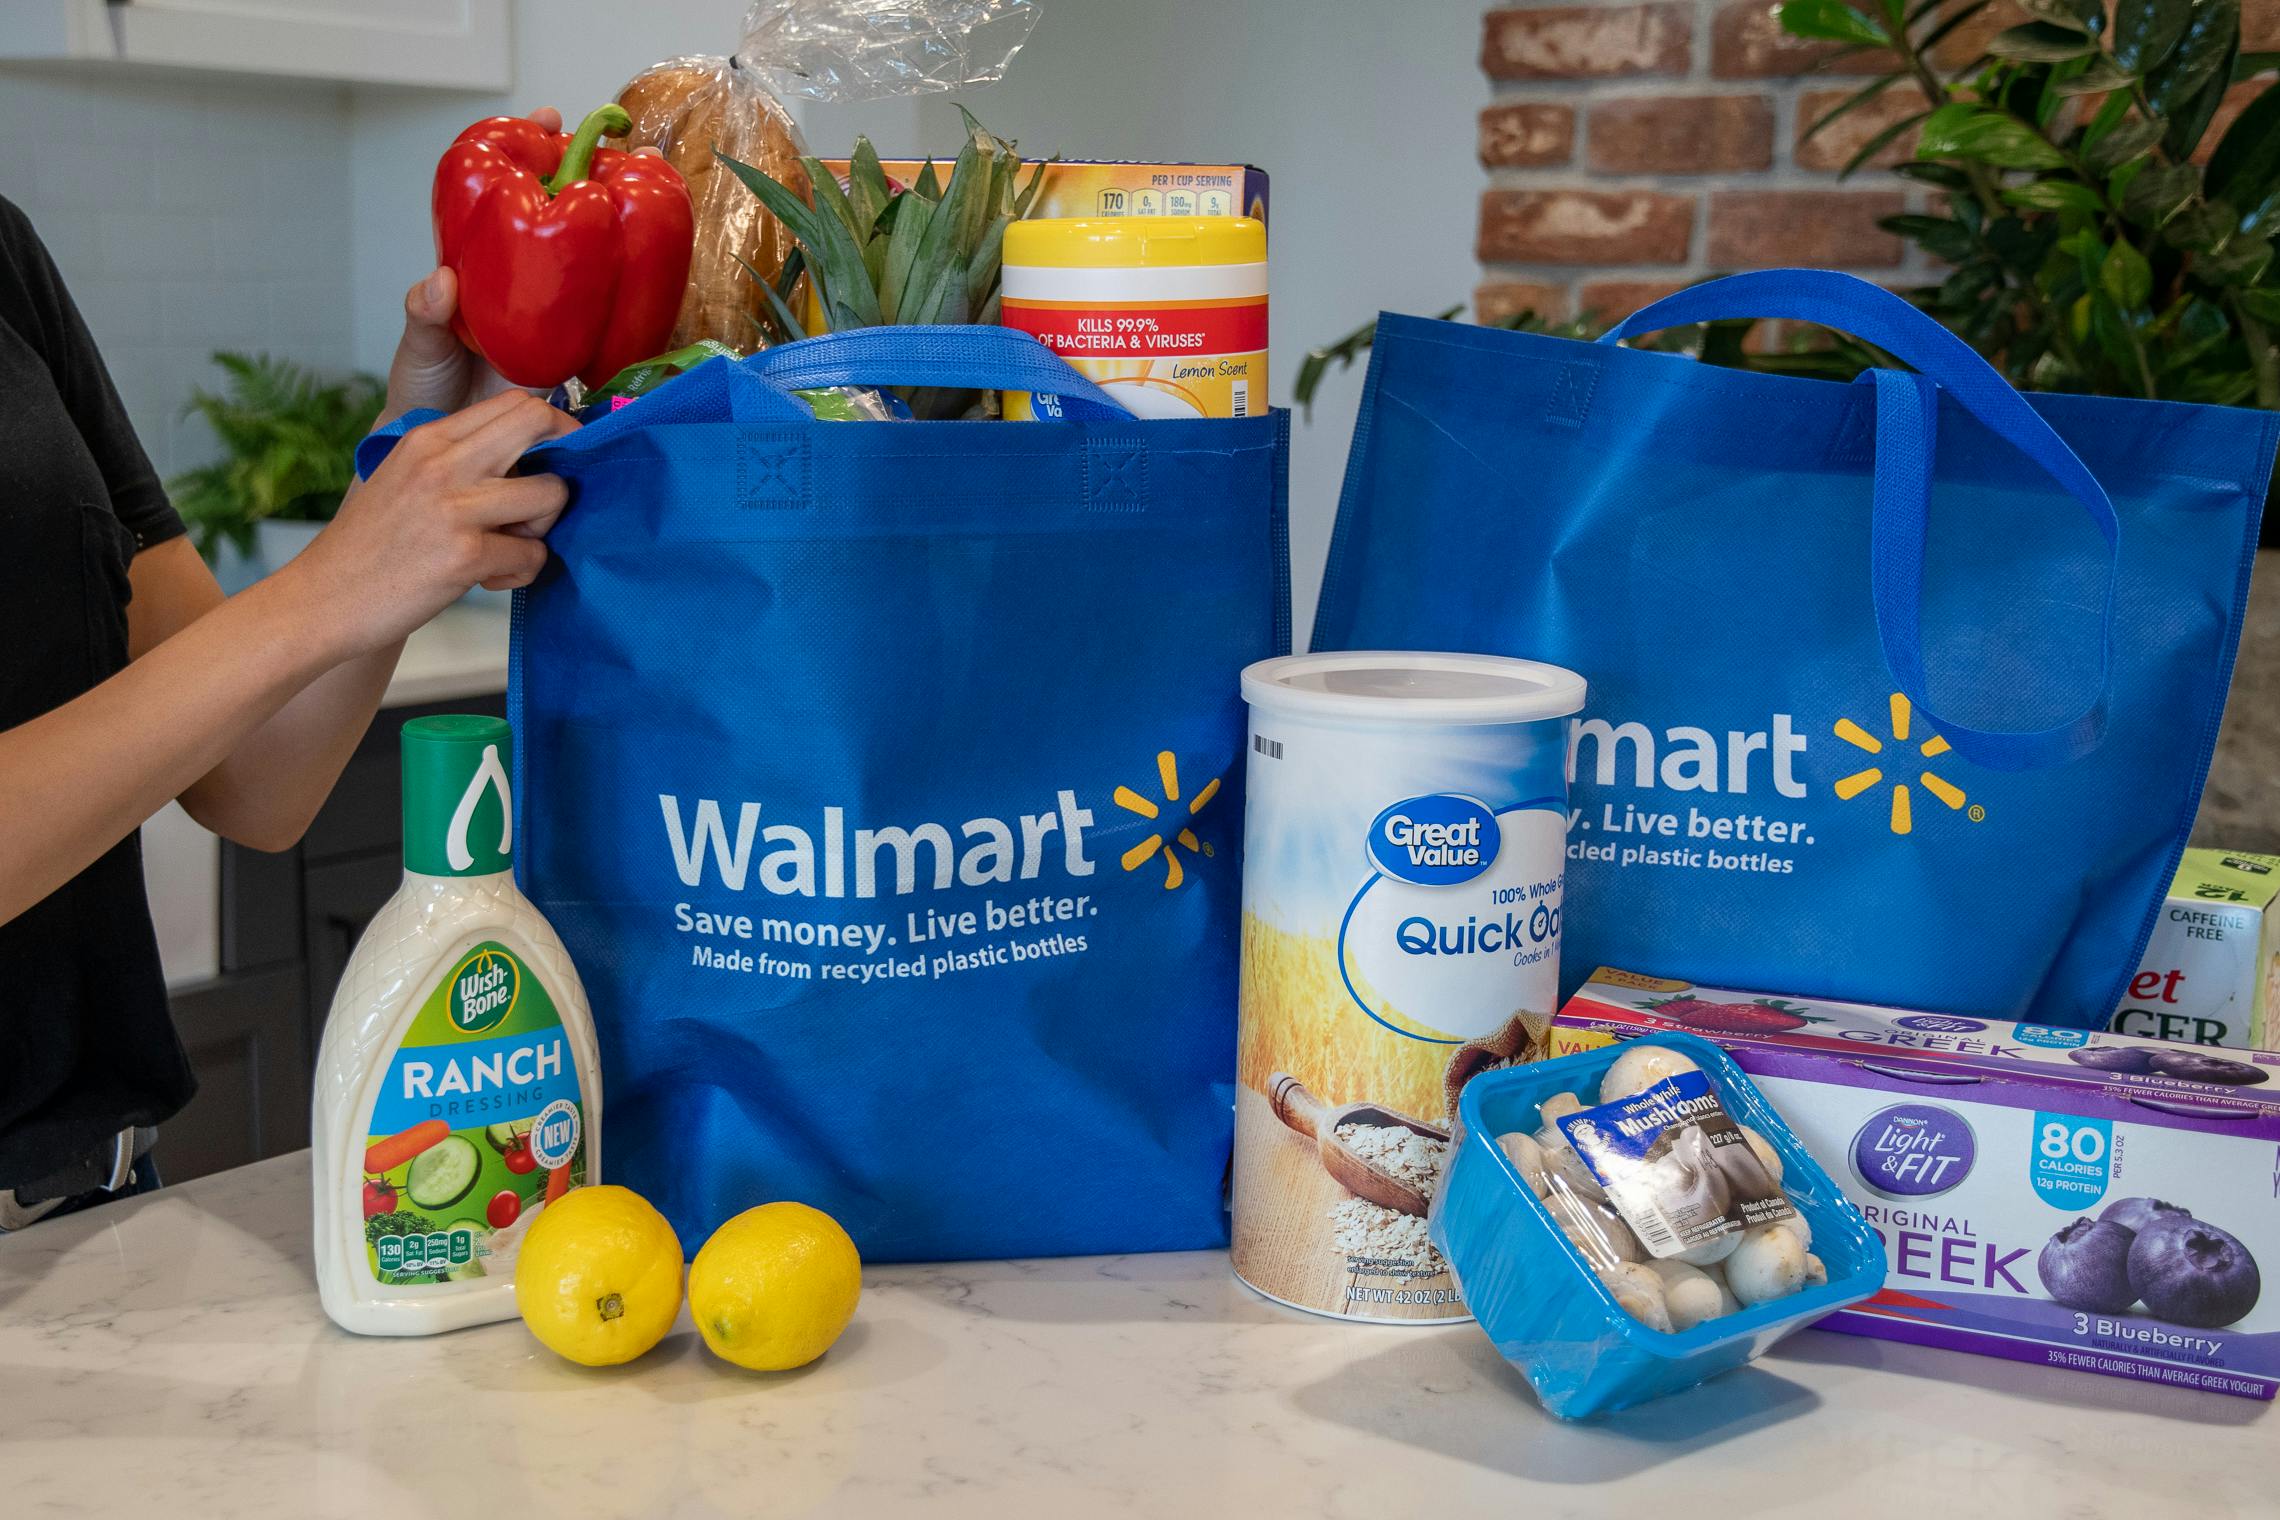 walmart grocery delivery bags 27 1591125654 1591125654